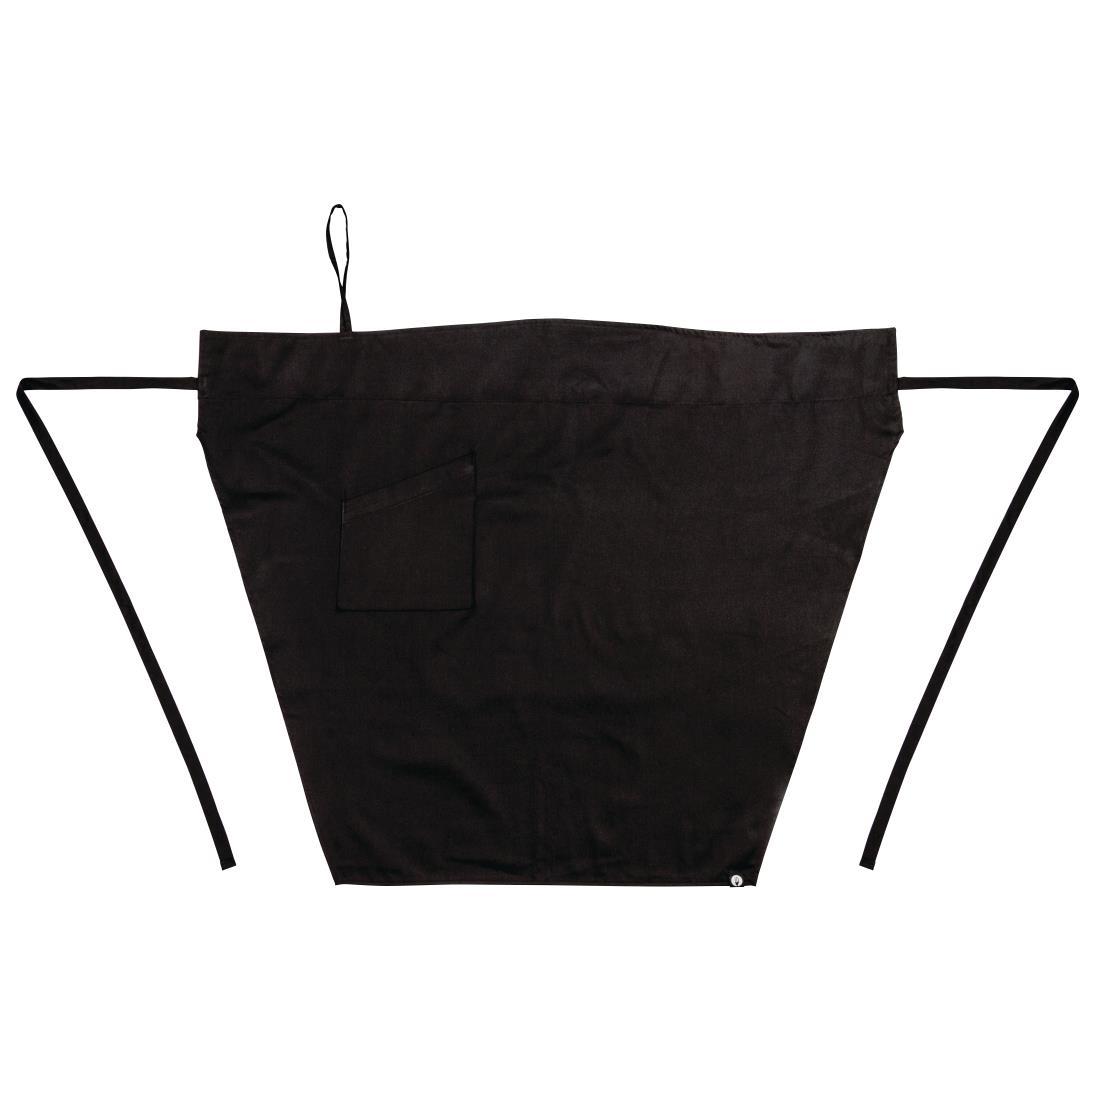 Chef Works Executive Chefs Tapered Apron Black - A577  - 2